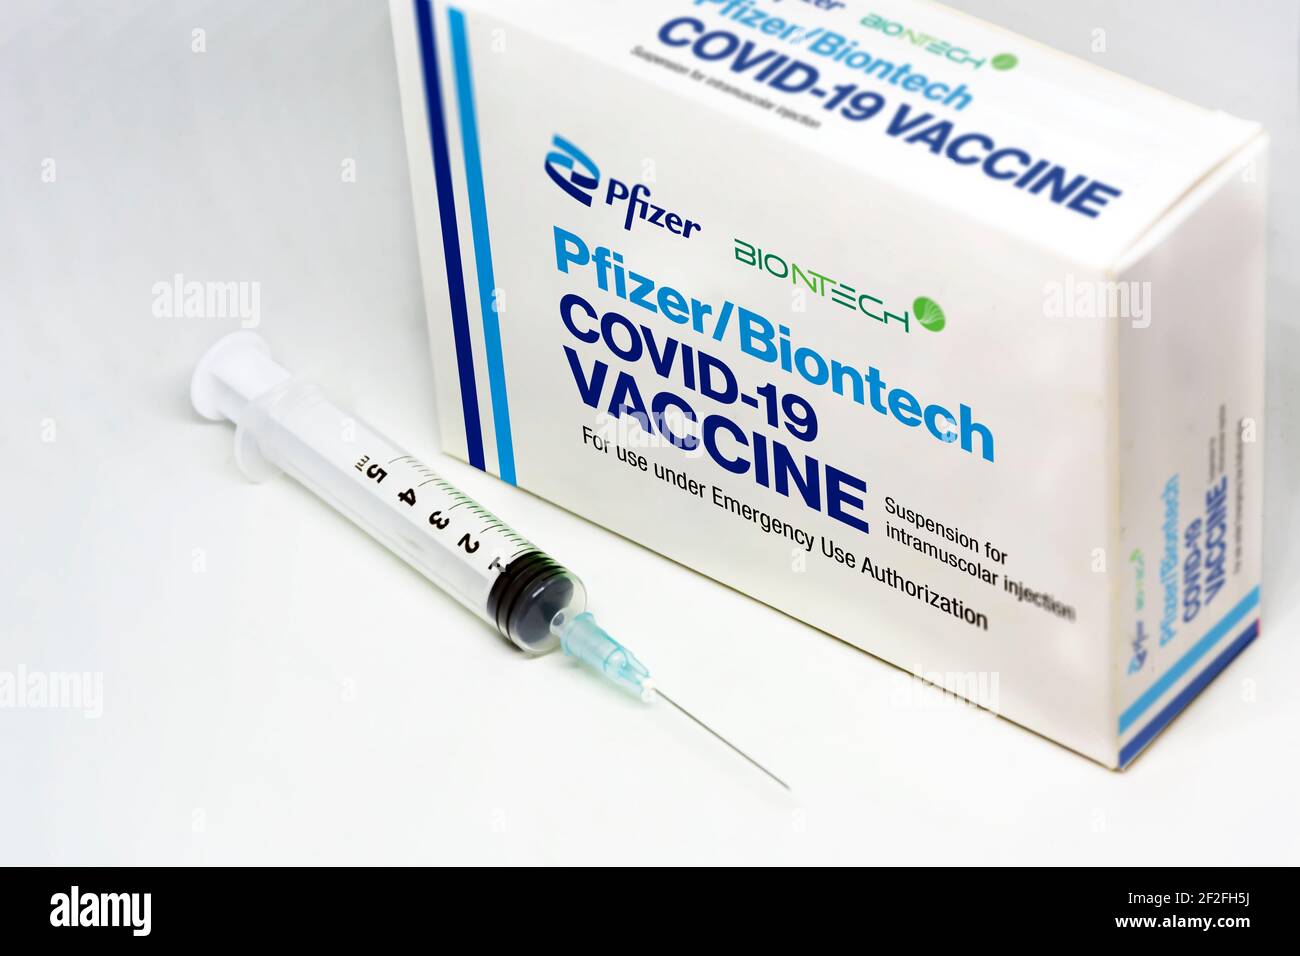 New York USA, february 5th 2021: A syringe next to the Pfizer BioNTech Covid-19 vaccine box isolated on a white background. Health and prevention. Stock Photo